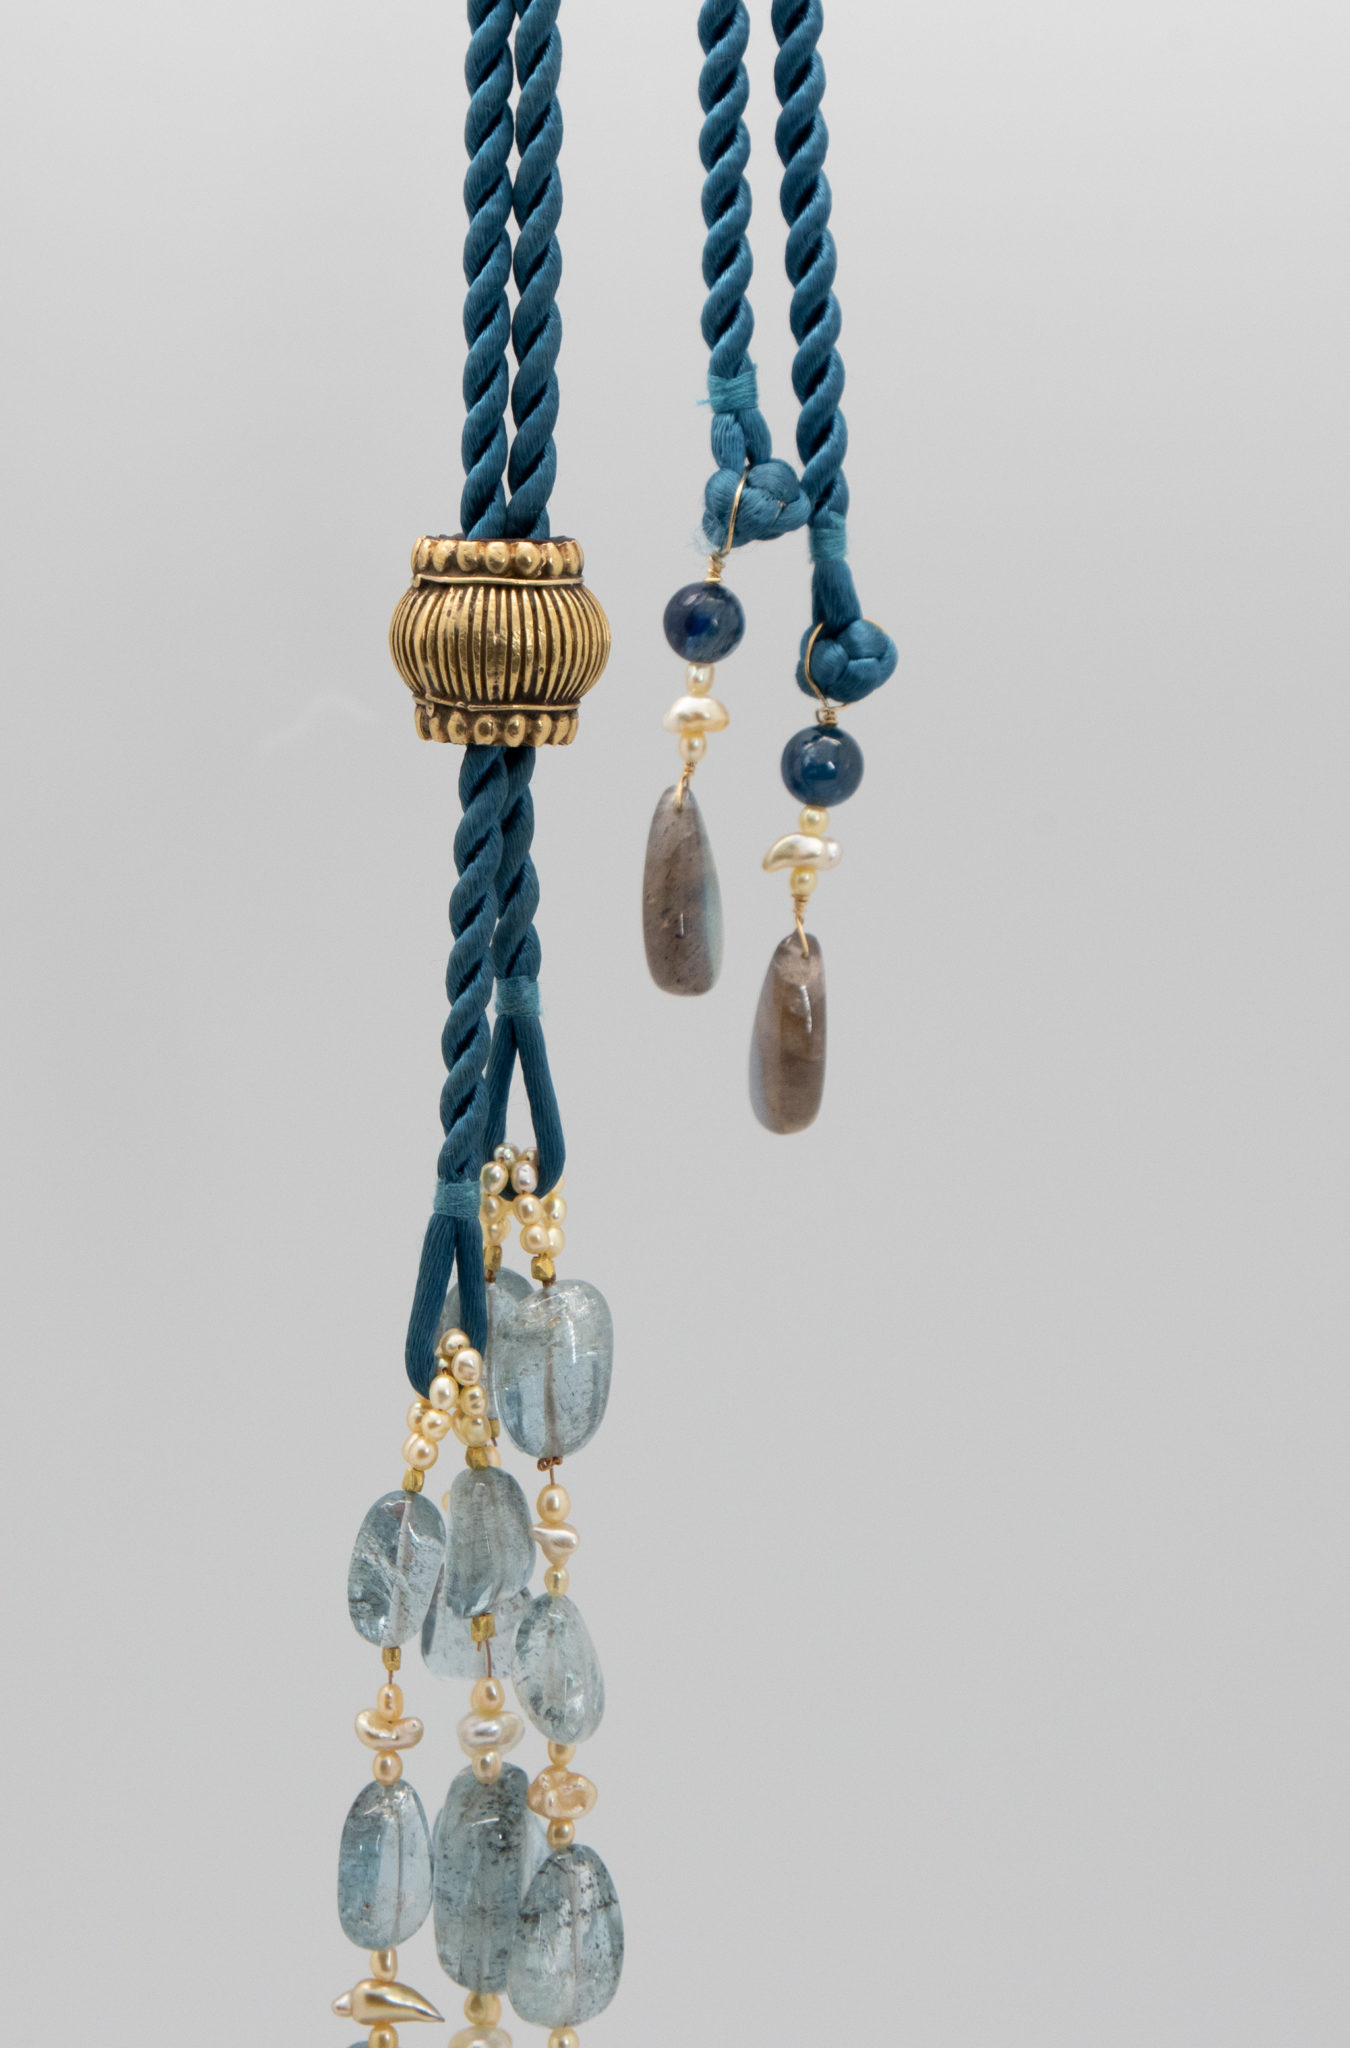 dressmaker details on this aquamarine crystal necklace showing silk cords, pearl loops and tassel detail